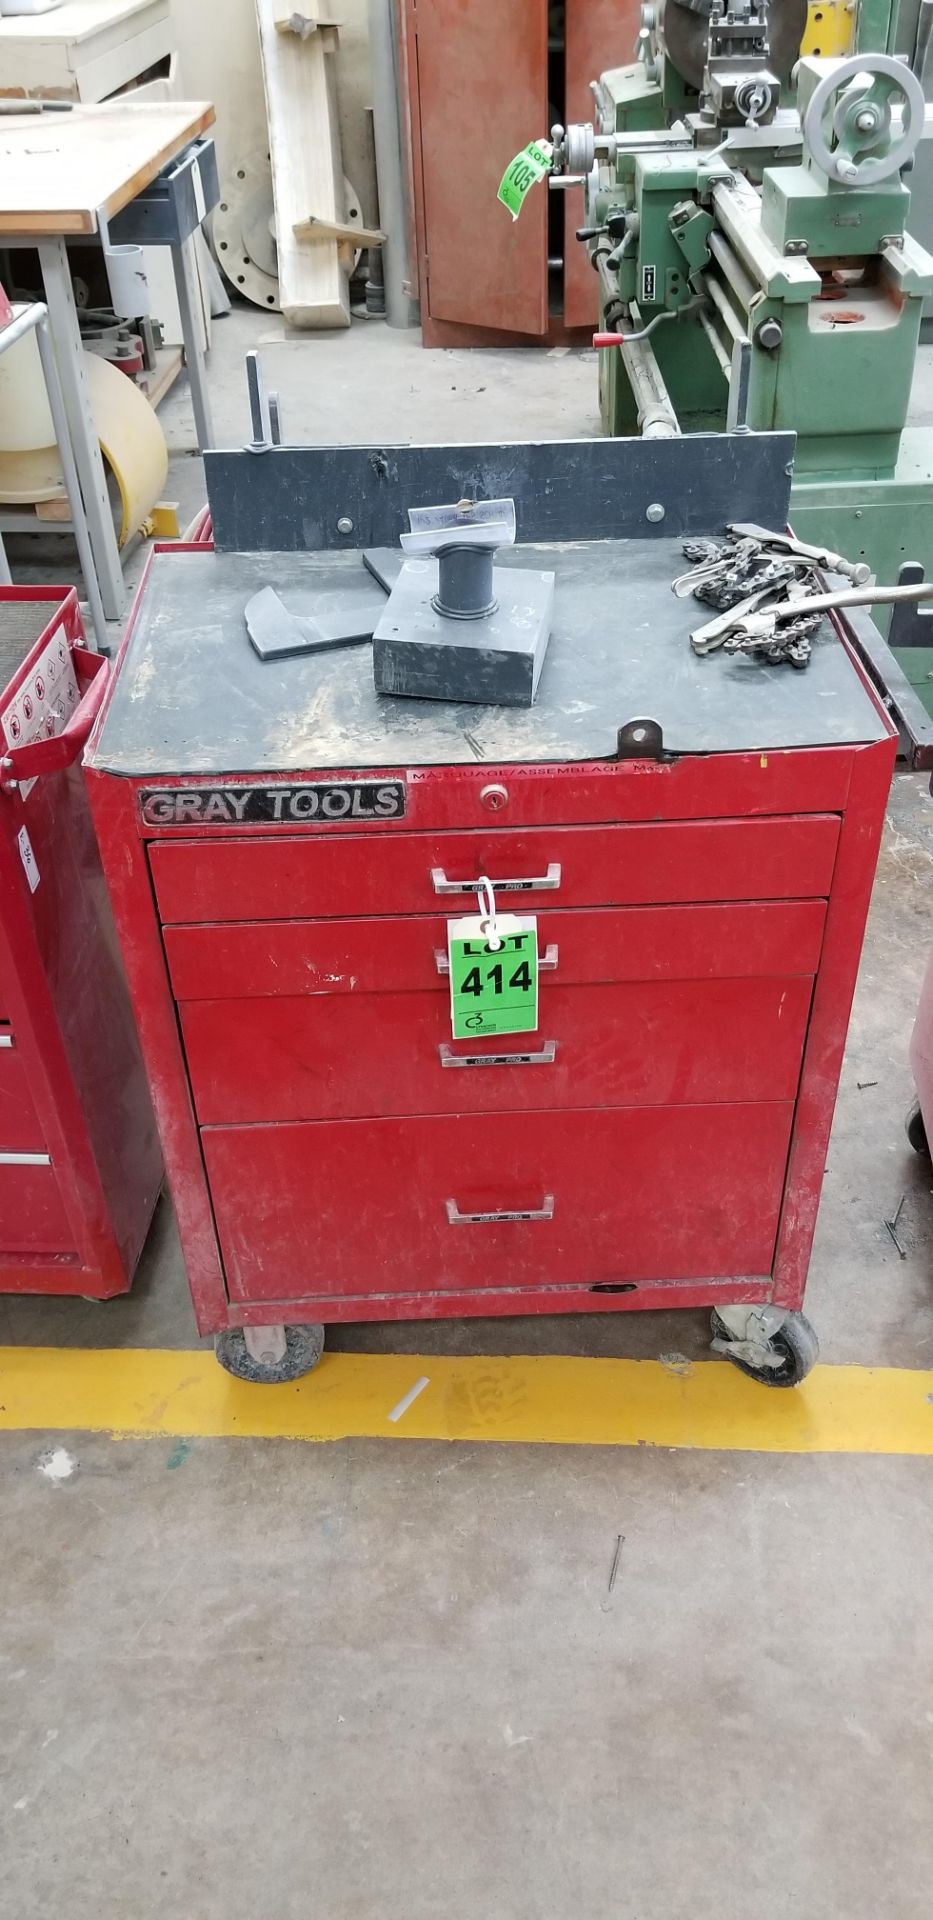 GRAY TOOLS 4-drawer steel tool chest on casters with rubber mat top and contents including: hand